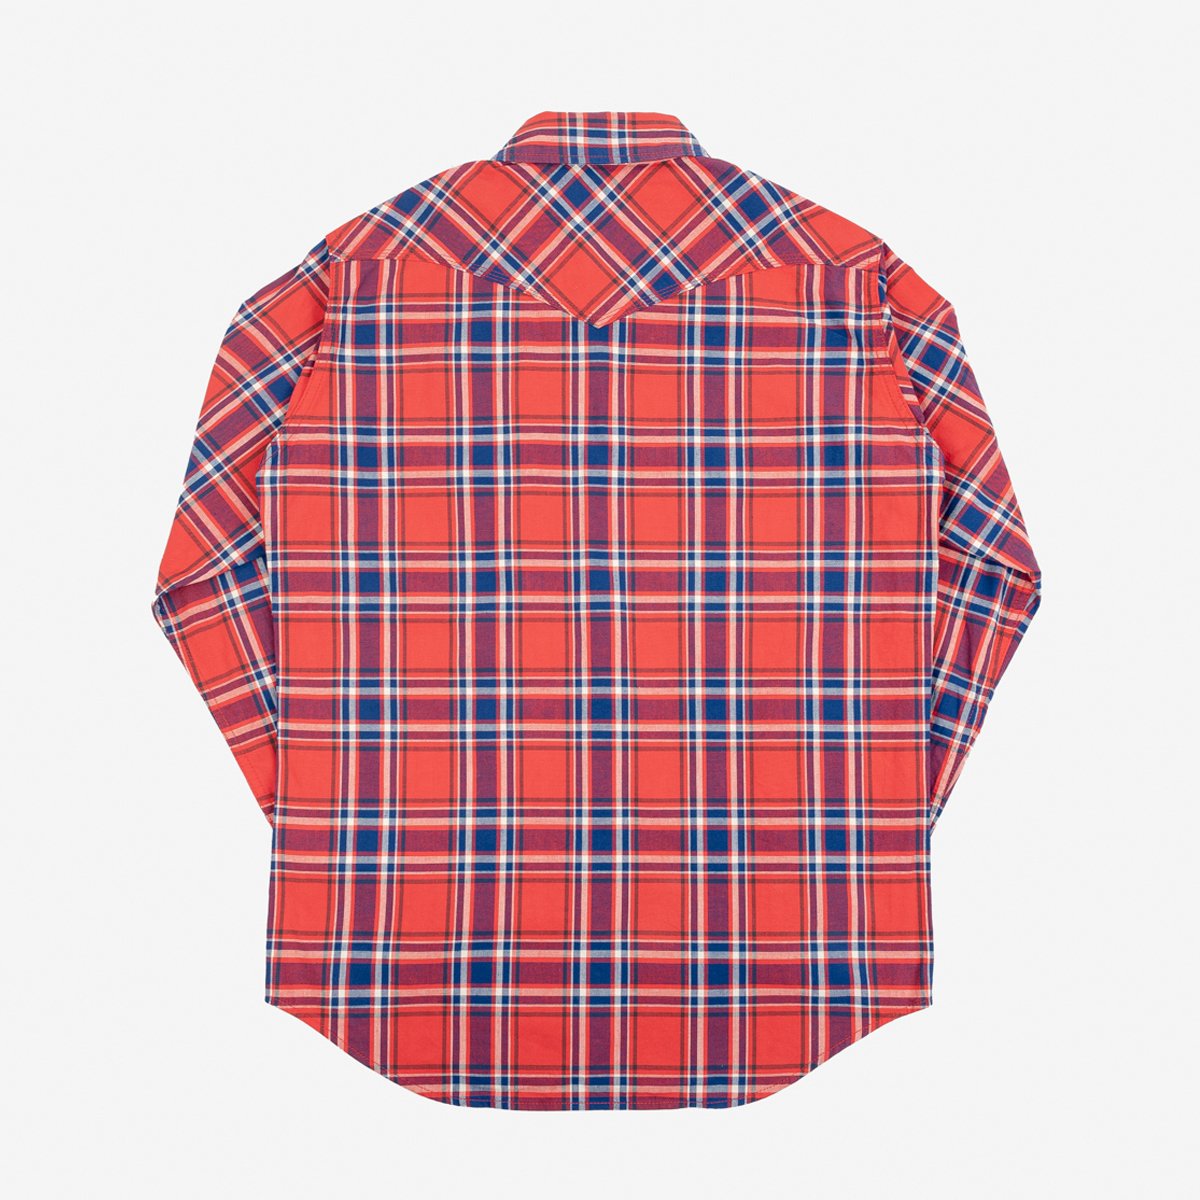 Iron Heart IHSH-355-RED 5oz Selvedge Madras Check Western Shirt - Red